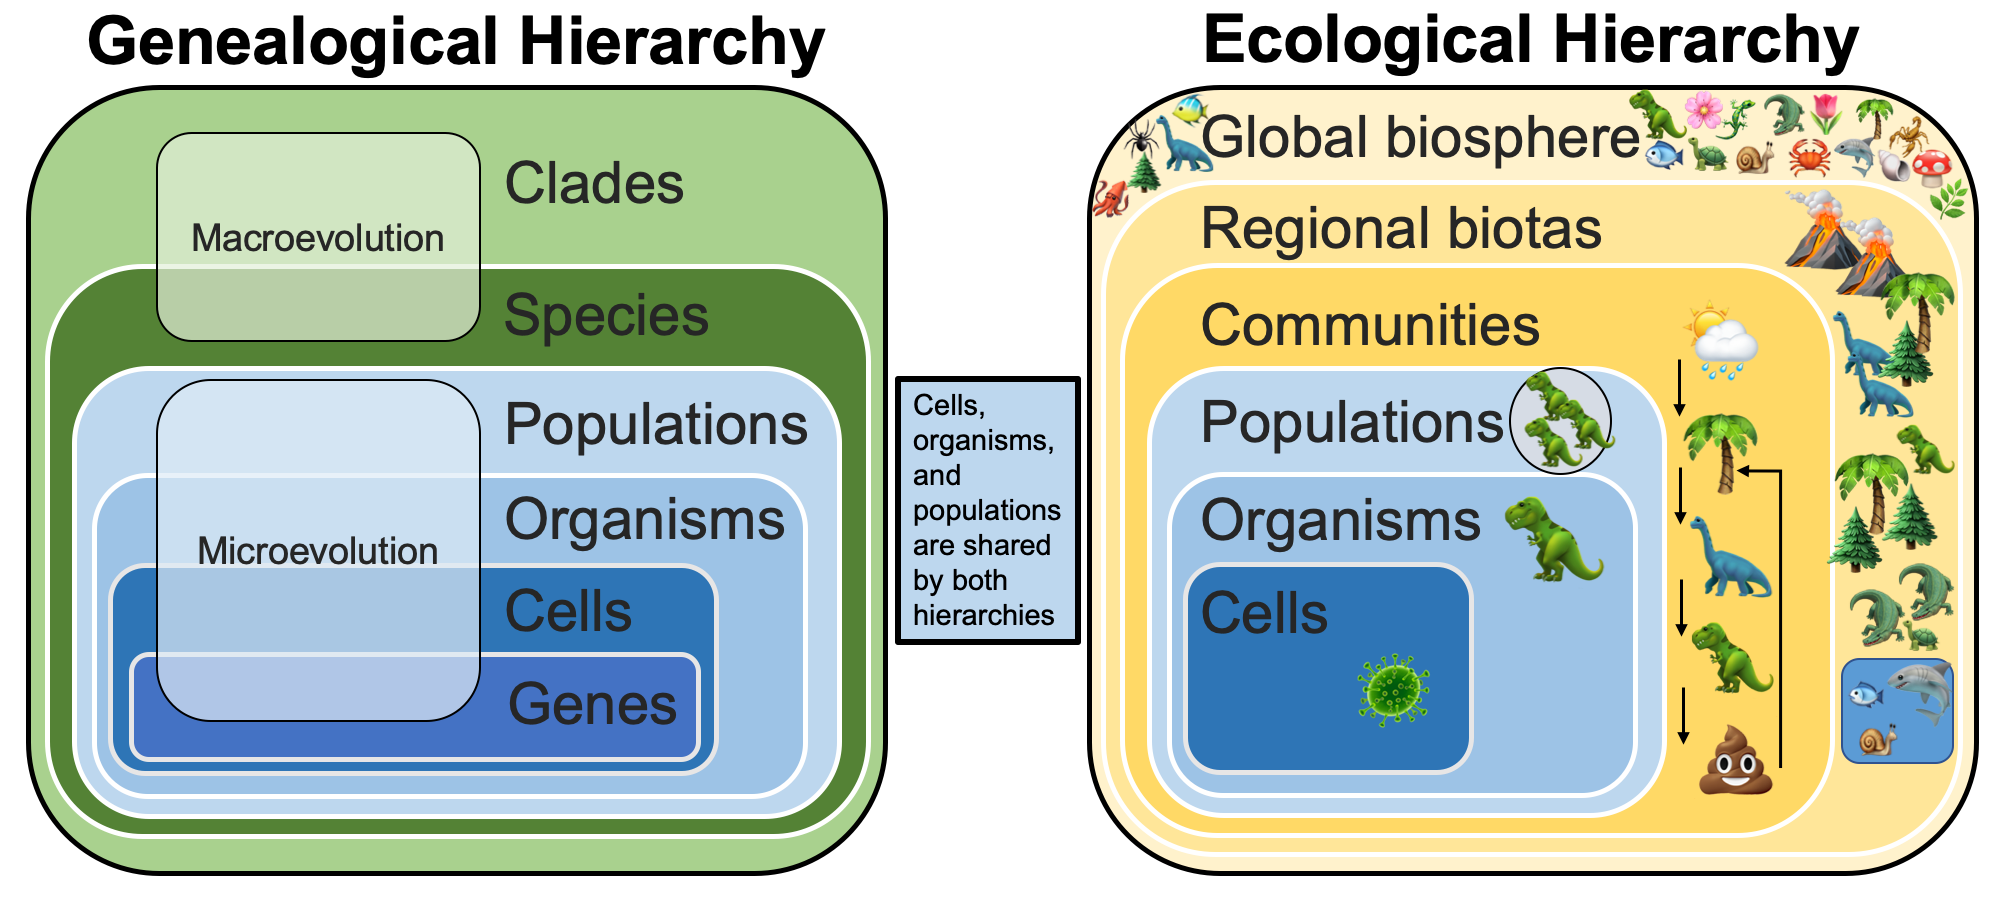 Diagram showing the genealogical and ecological hierarchies, as well as relationships between them.